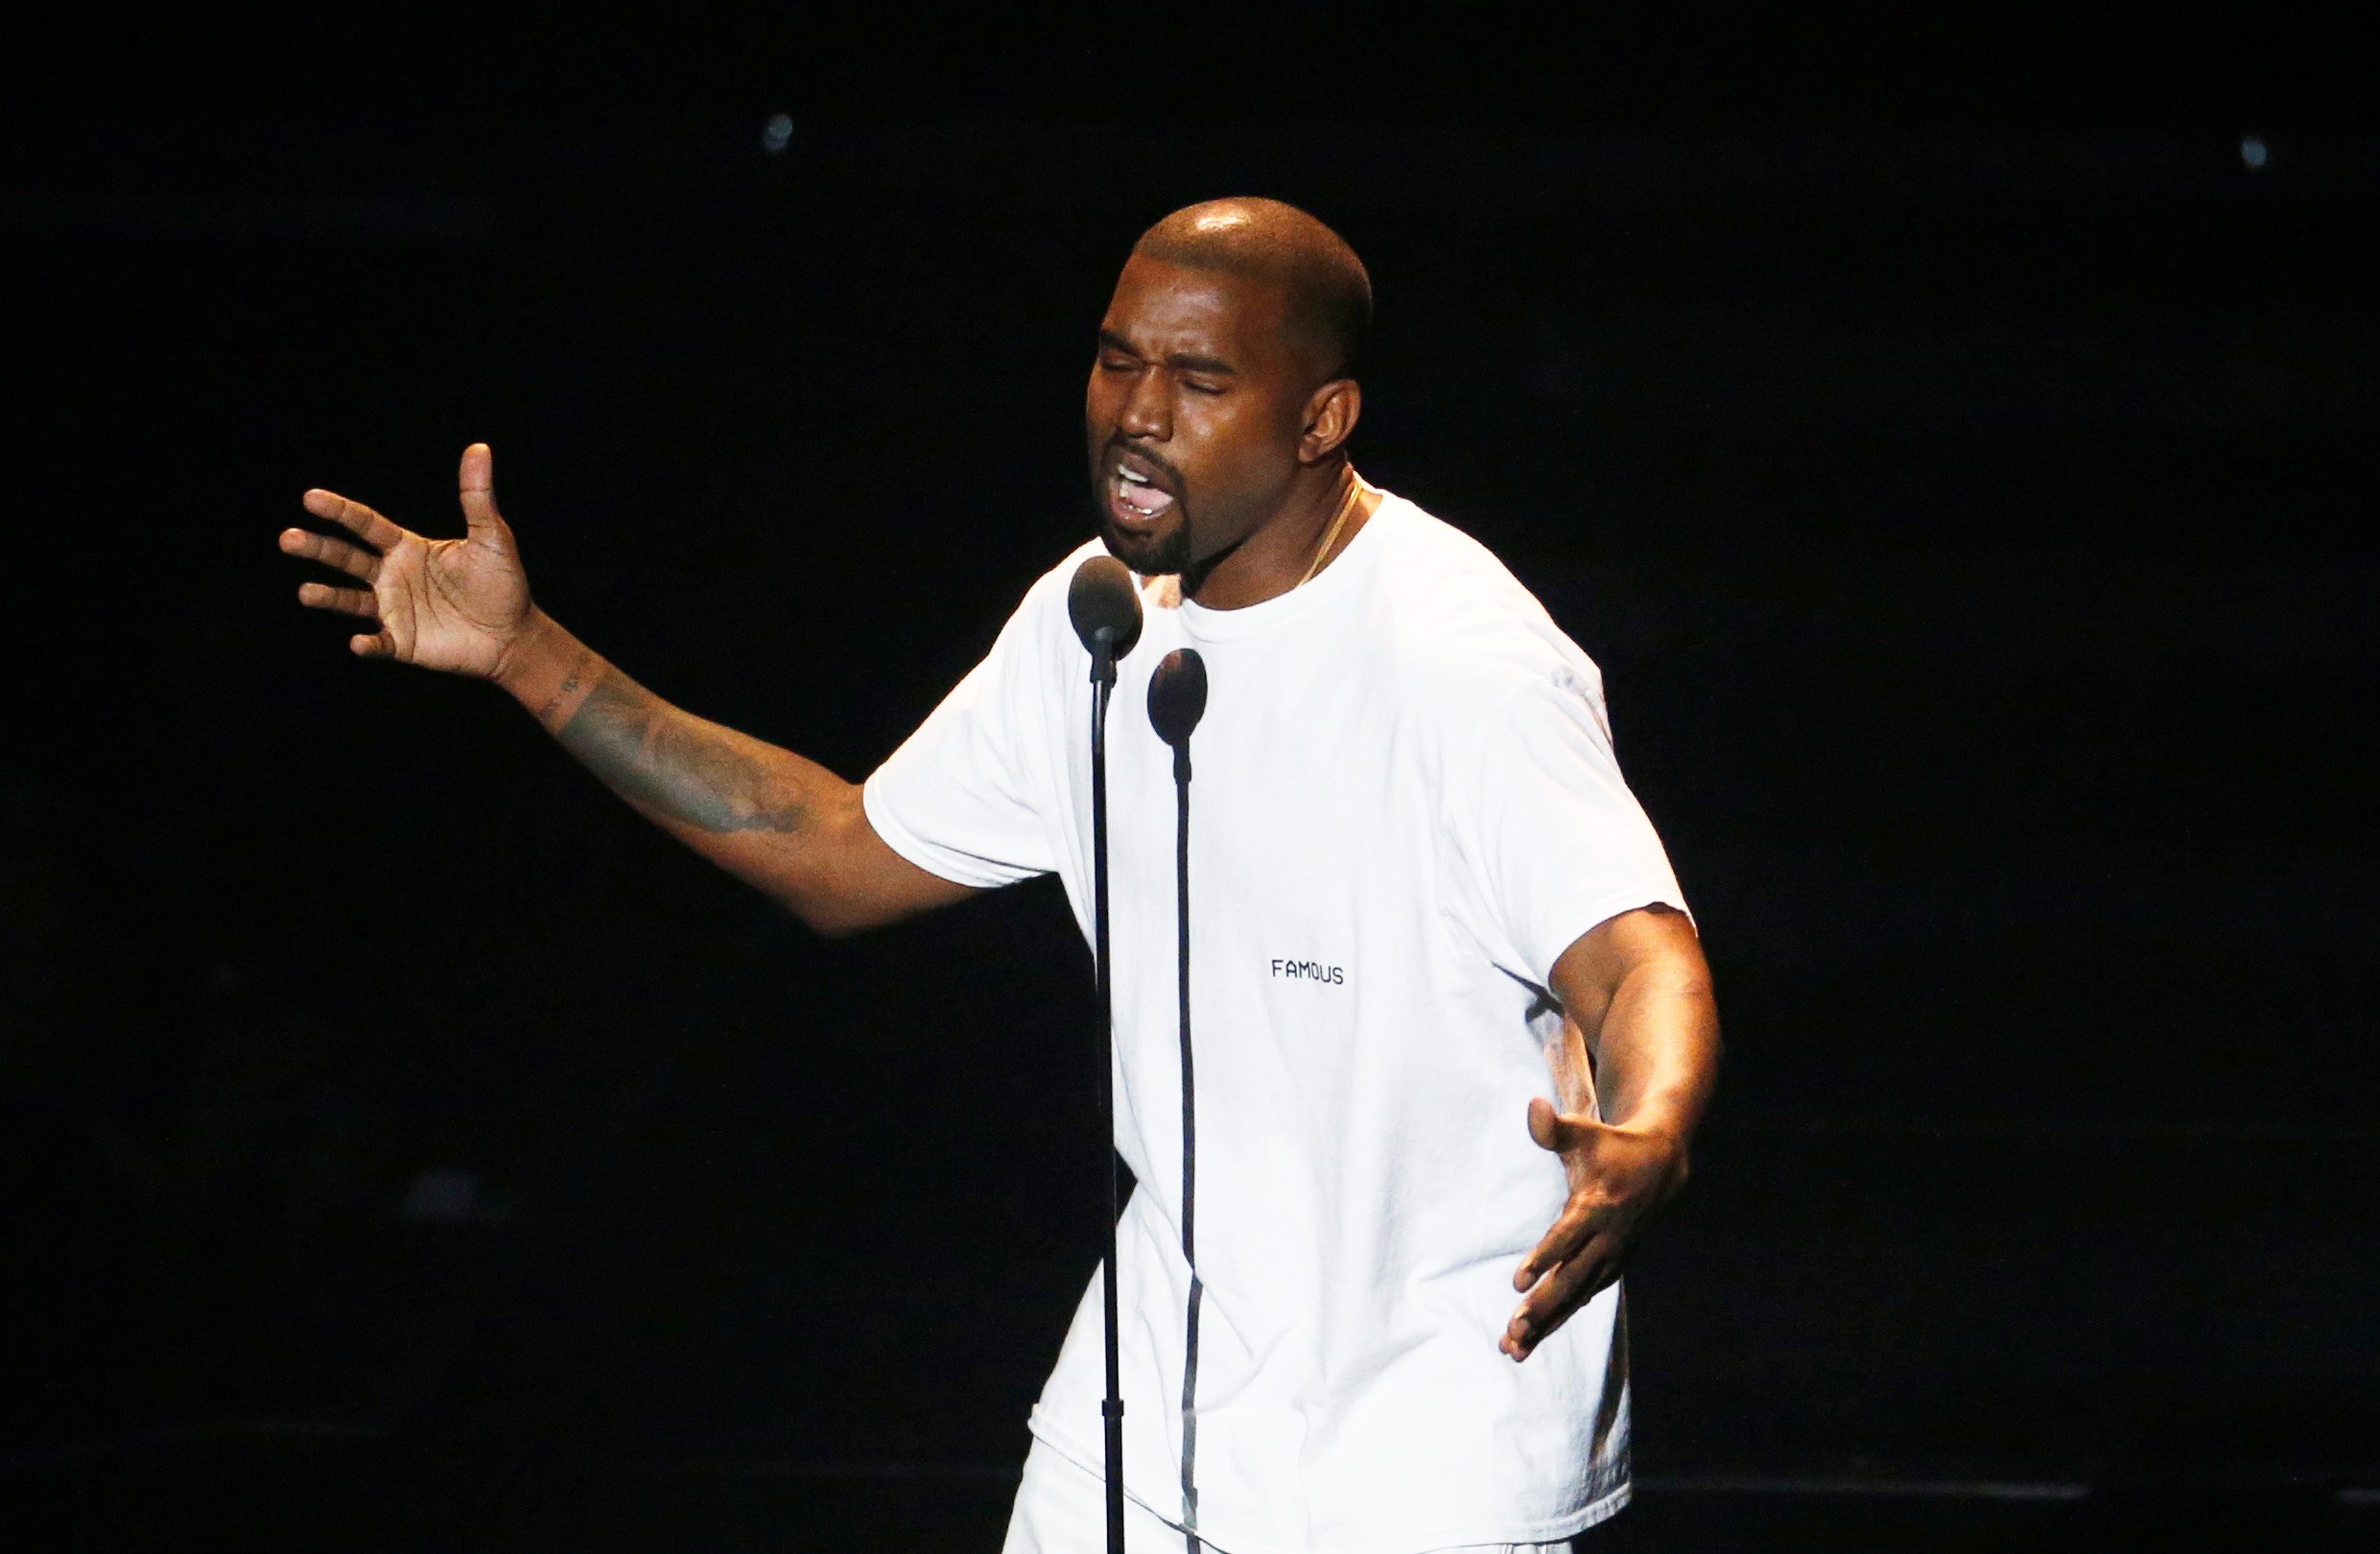 Kanye West teases new music ahead of ‘Donda’ album release